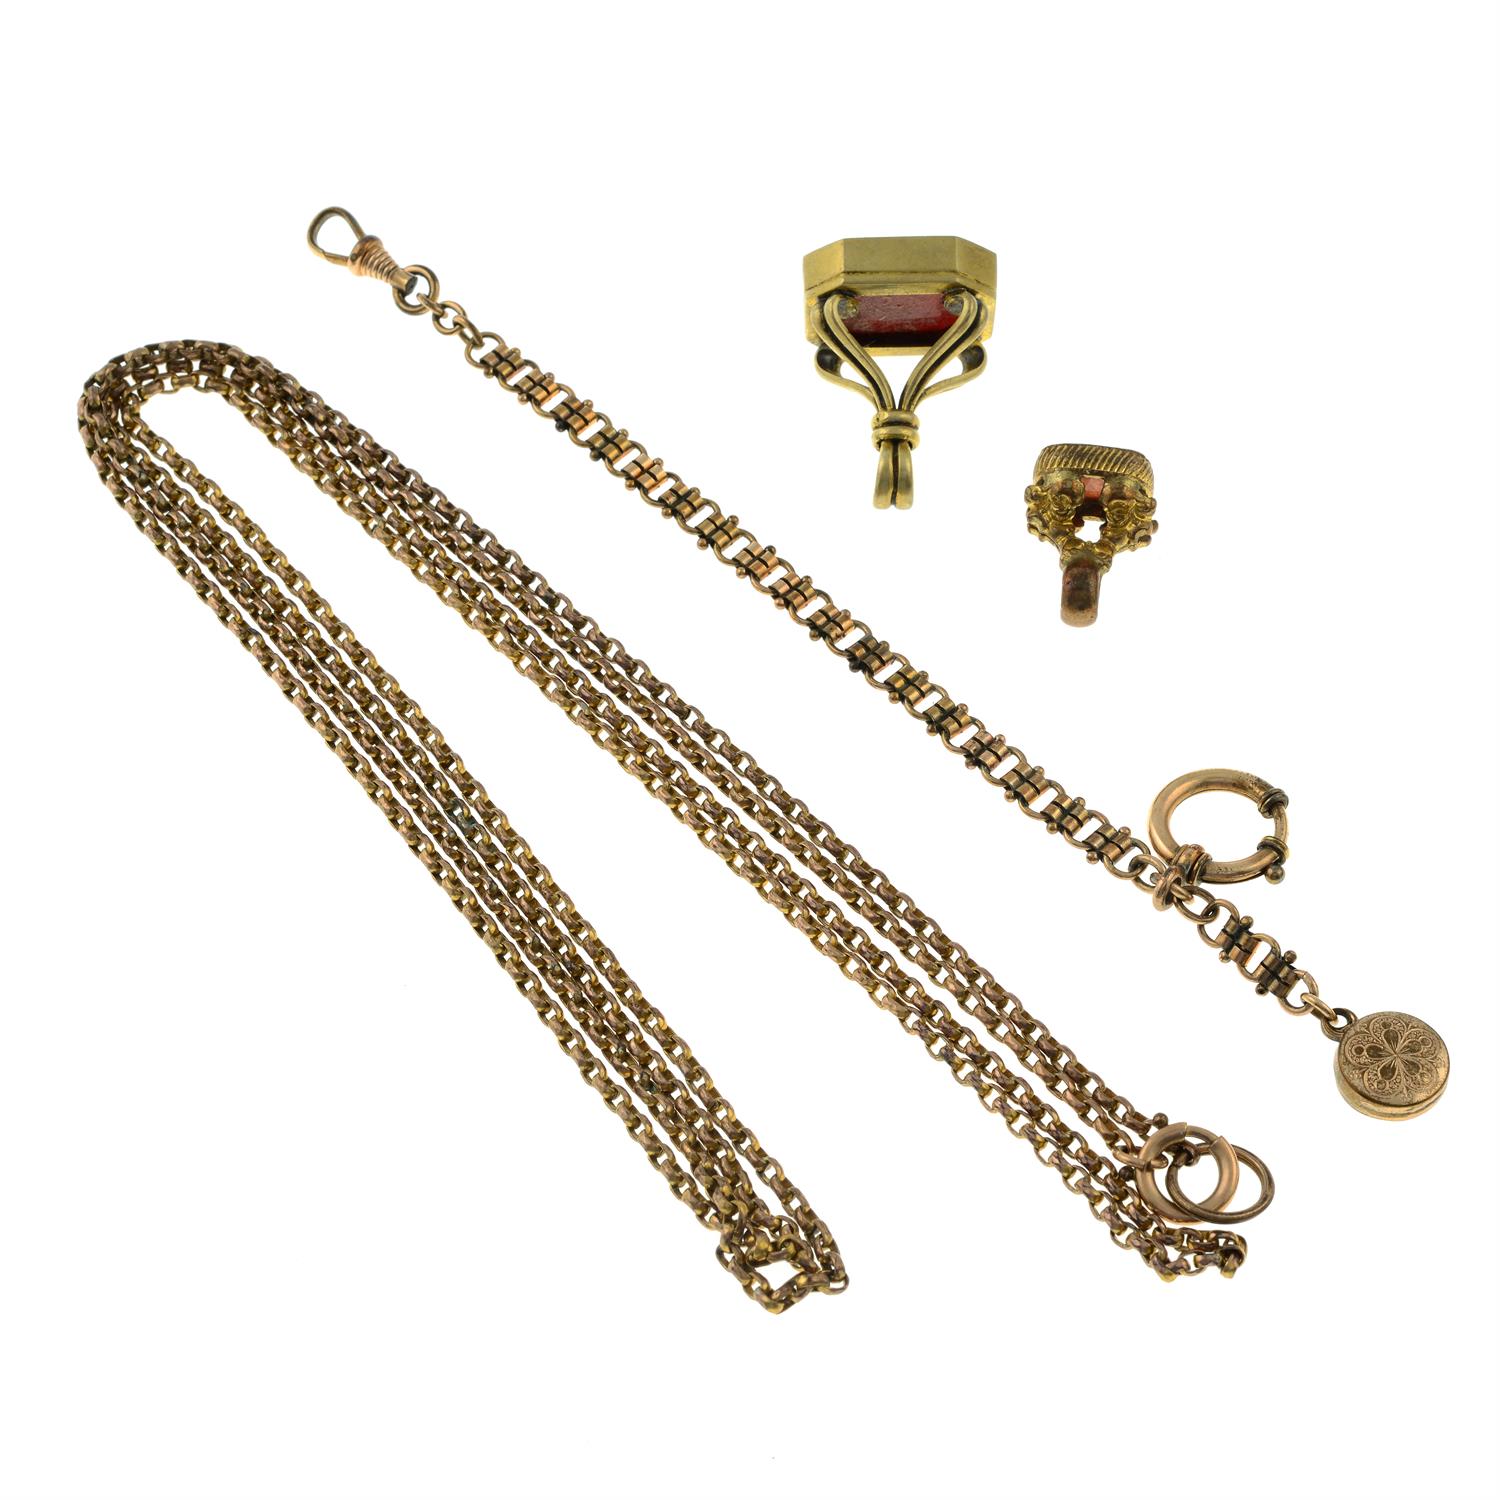 Four items of late Victorian jewellery, to include two carved seal fobs, a longuard chain and a - Image 3 of 3